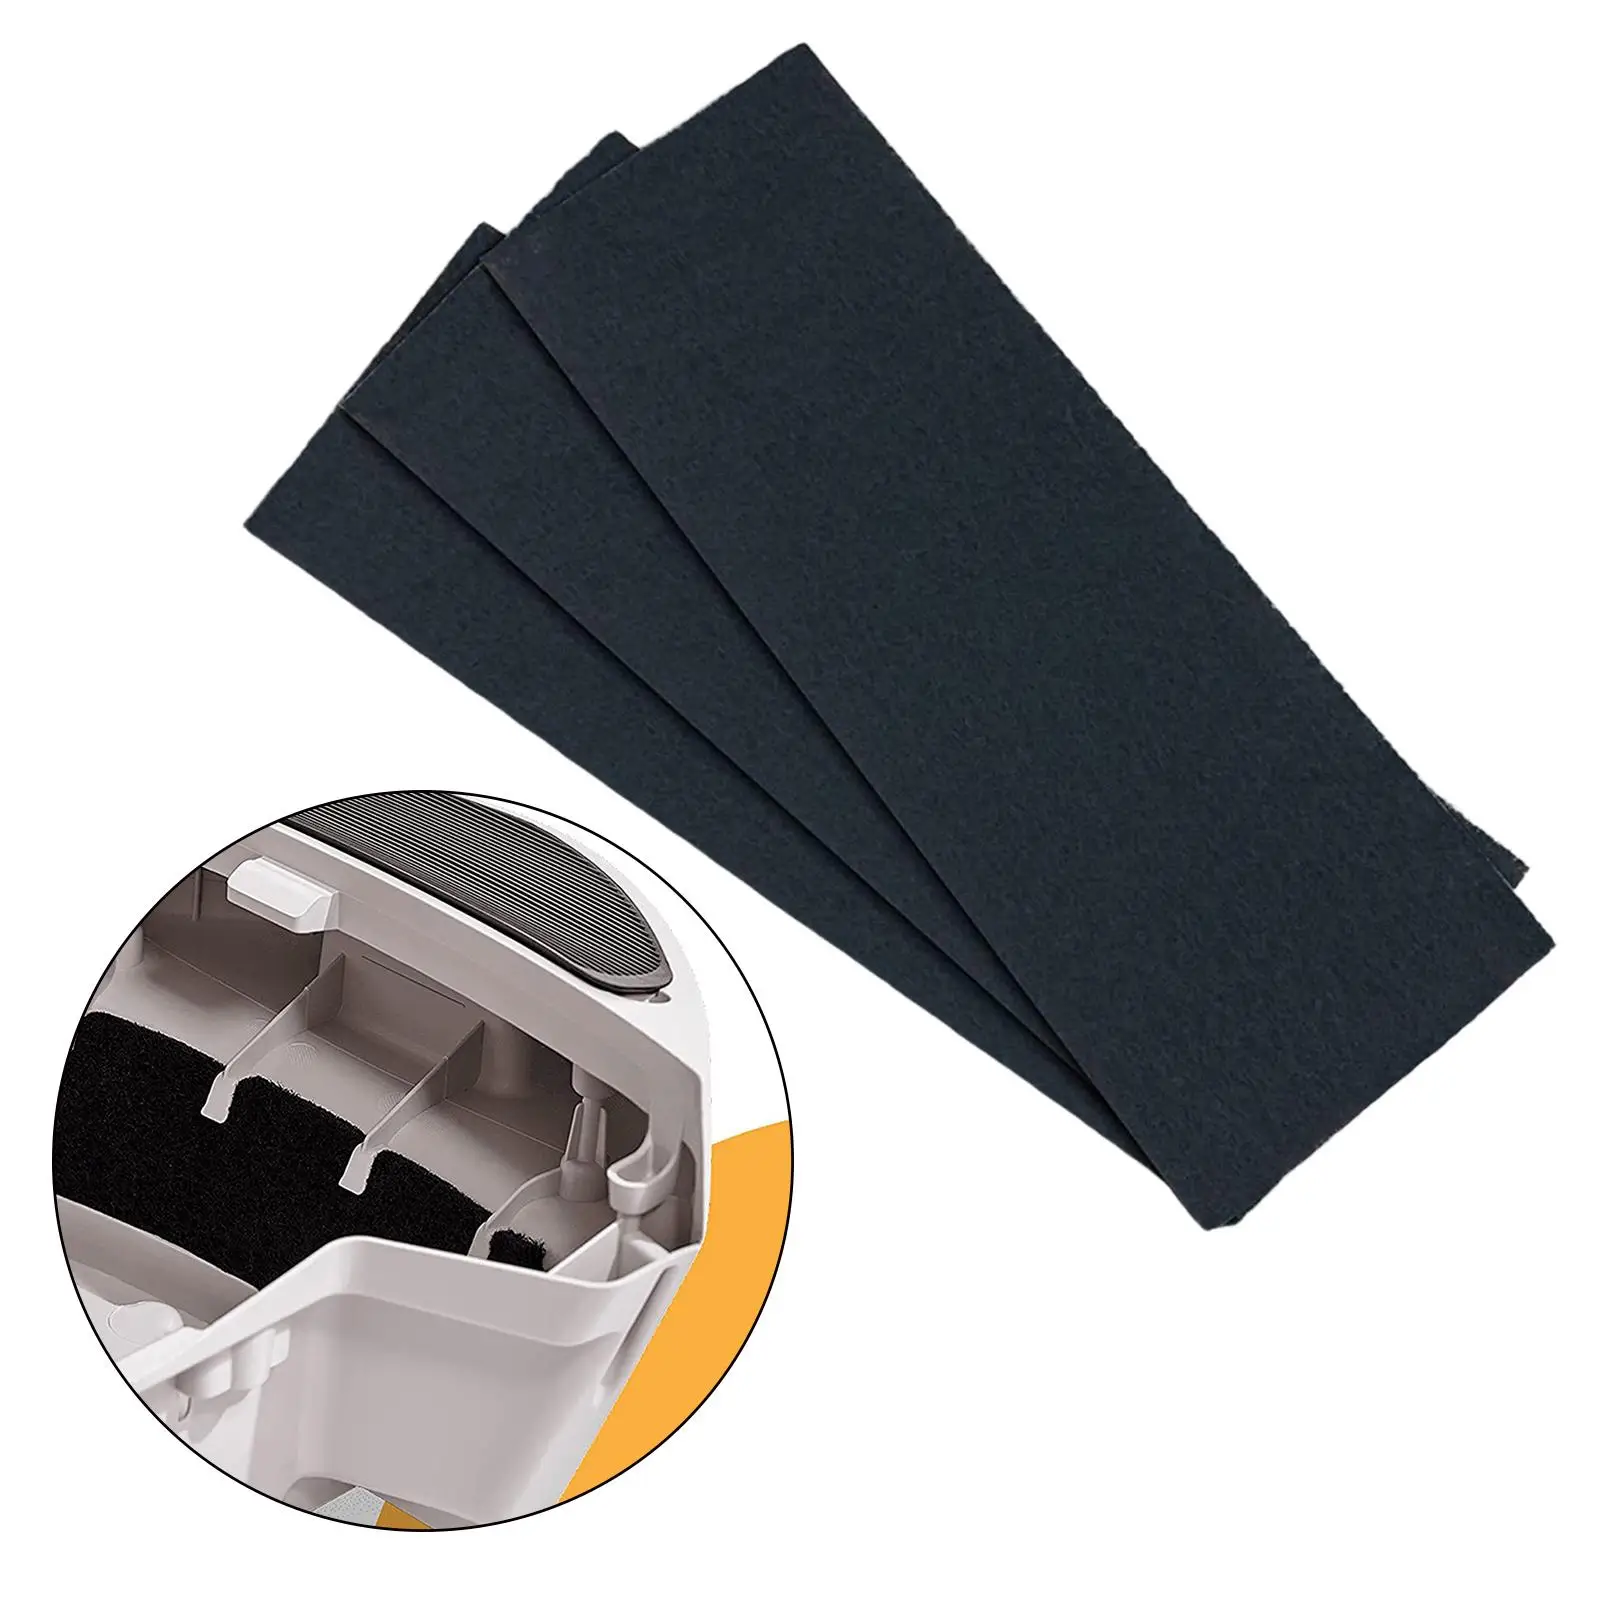 3 Pieces Replacement Filter Absorbs Odors Litter Box Carbon Filters for Cat Litter Box